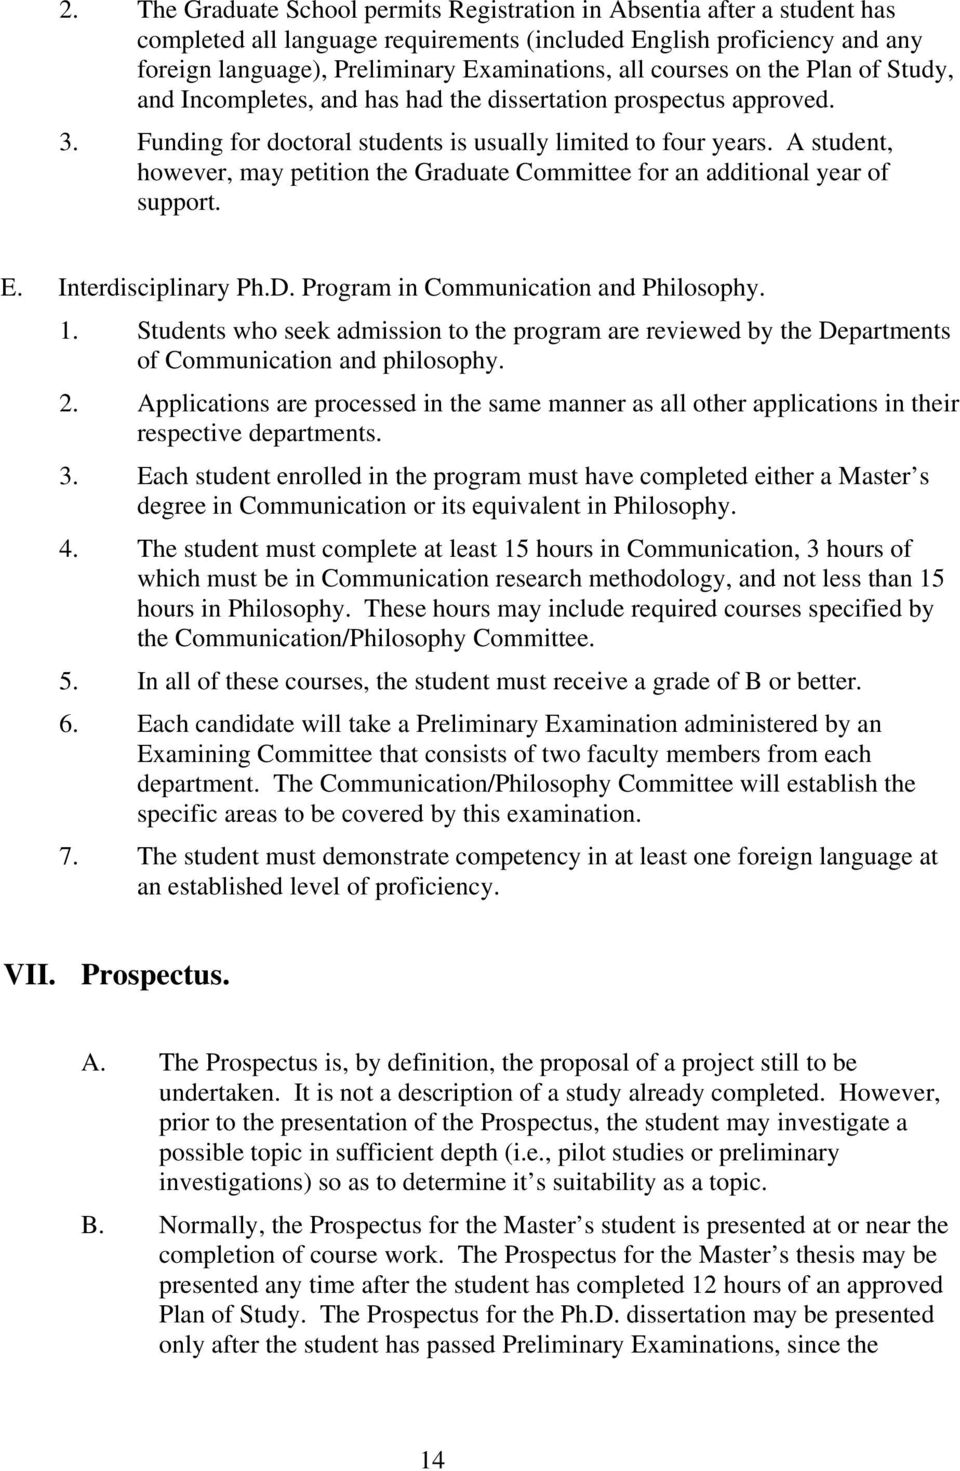 A student, however, may petition the Graduate Committee for an additional year of support. E. Interdisciplinary Ph.D. Program in Communication and Philosophy. 1.